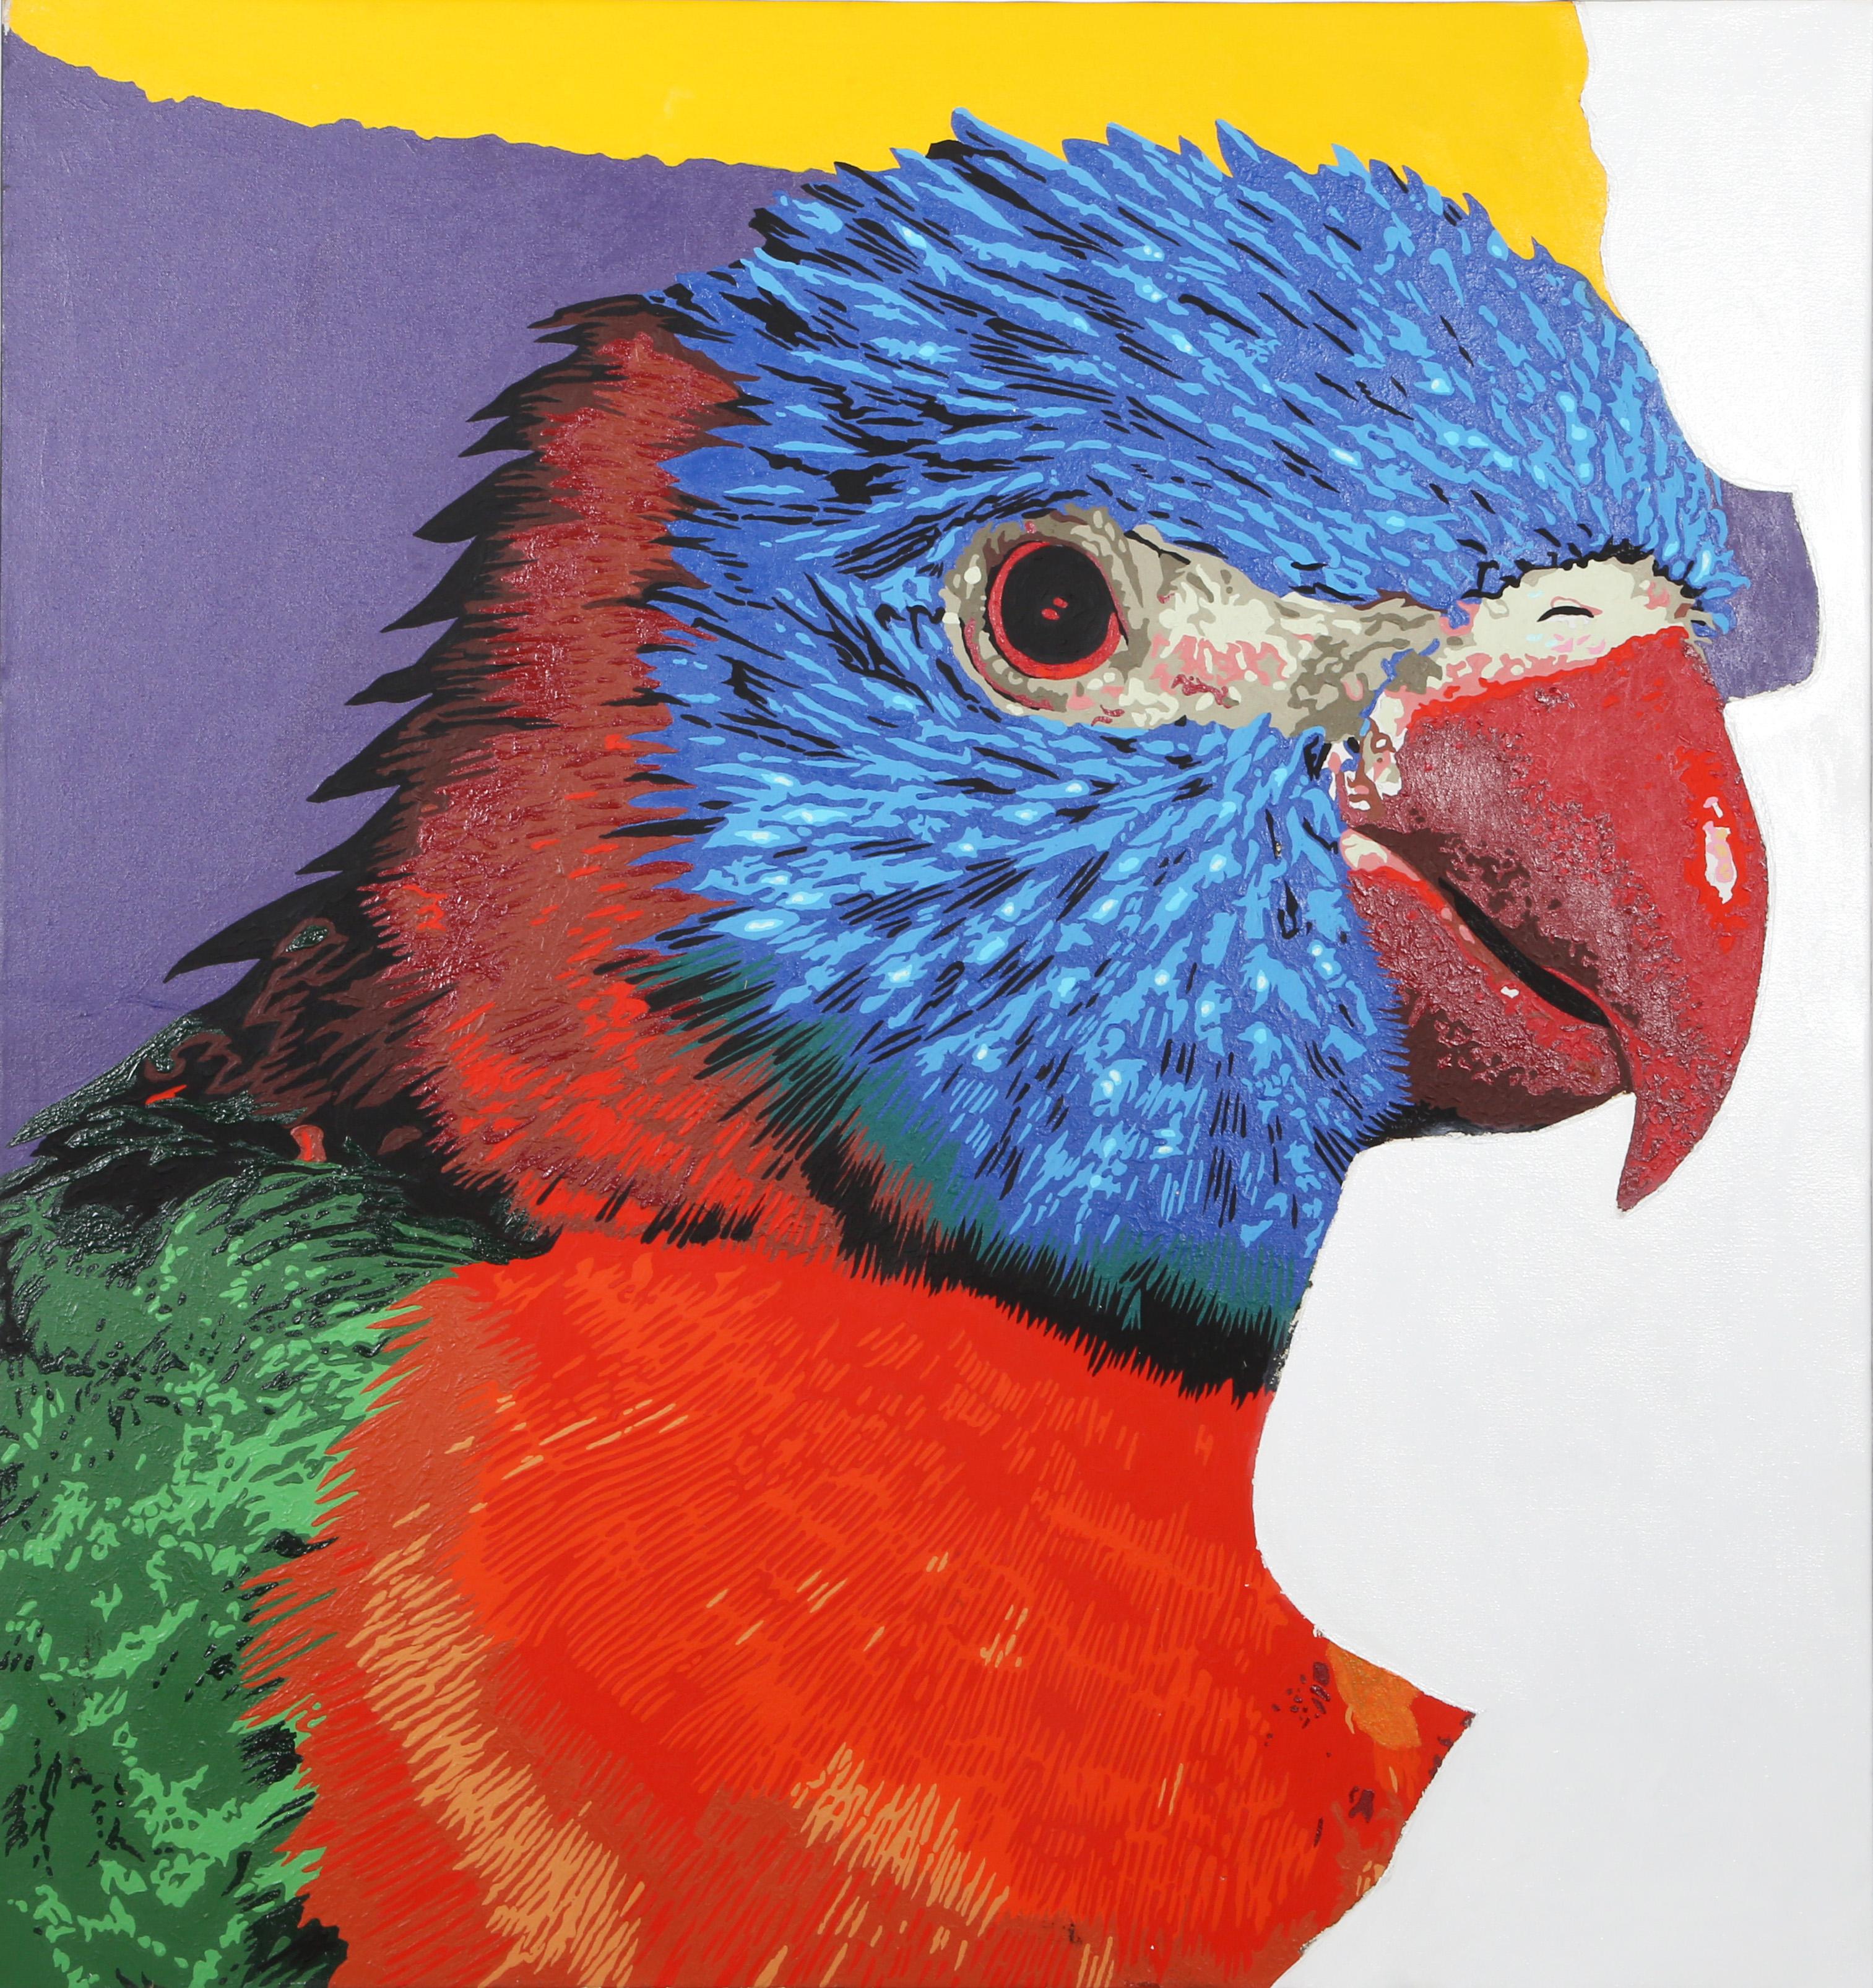 Parrot
Michael Knigin, American (1942–2011)
Acrylic on Canvas
Size: 39.5 x 37.25 in. (100.33 x 94.62 cm)

A close-up portrait of a Rainbow Lorikeet, a species of parrot found in Australia. Its bold colors are cleanly sectioned from each other and